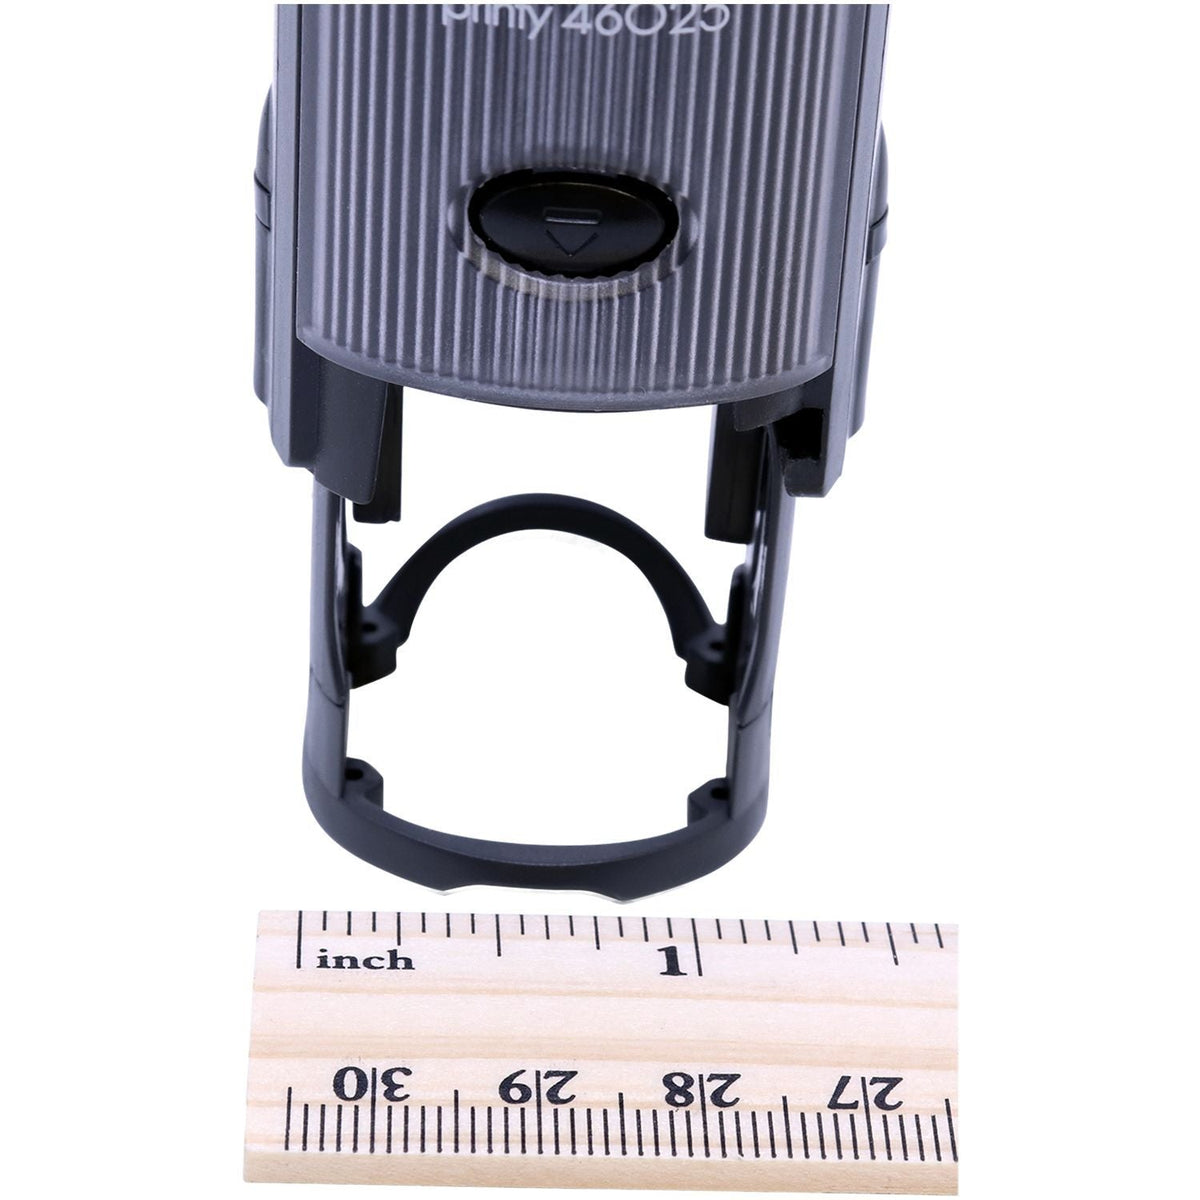 Measurment of Self-Inking Round Solid Star Stamp with Ruler